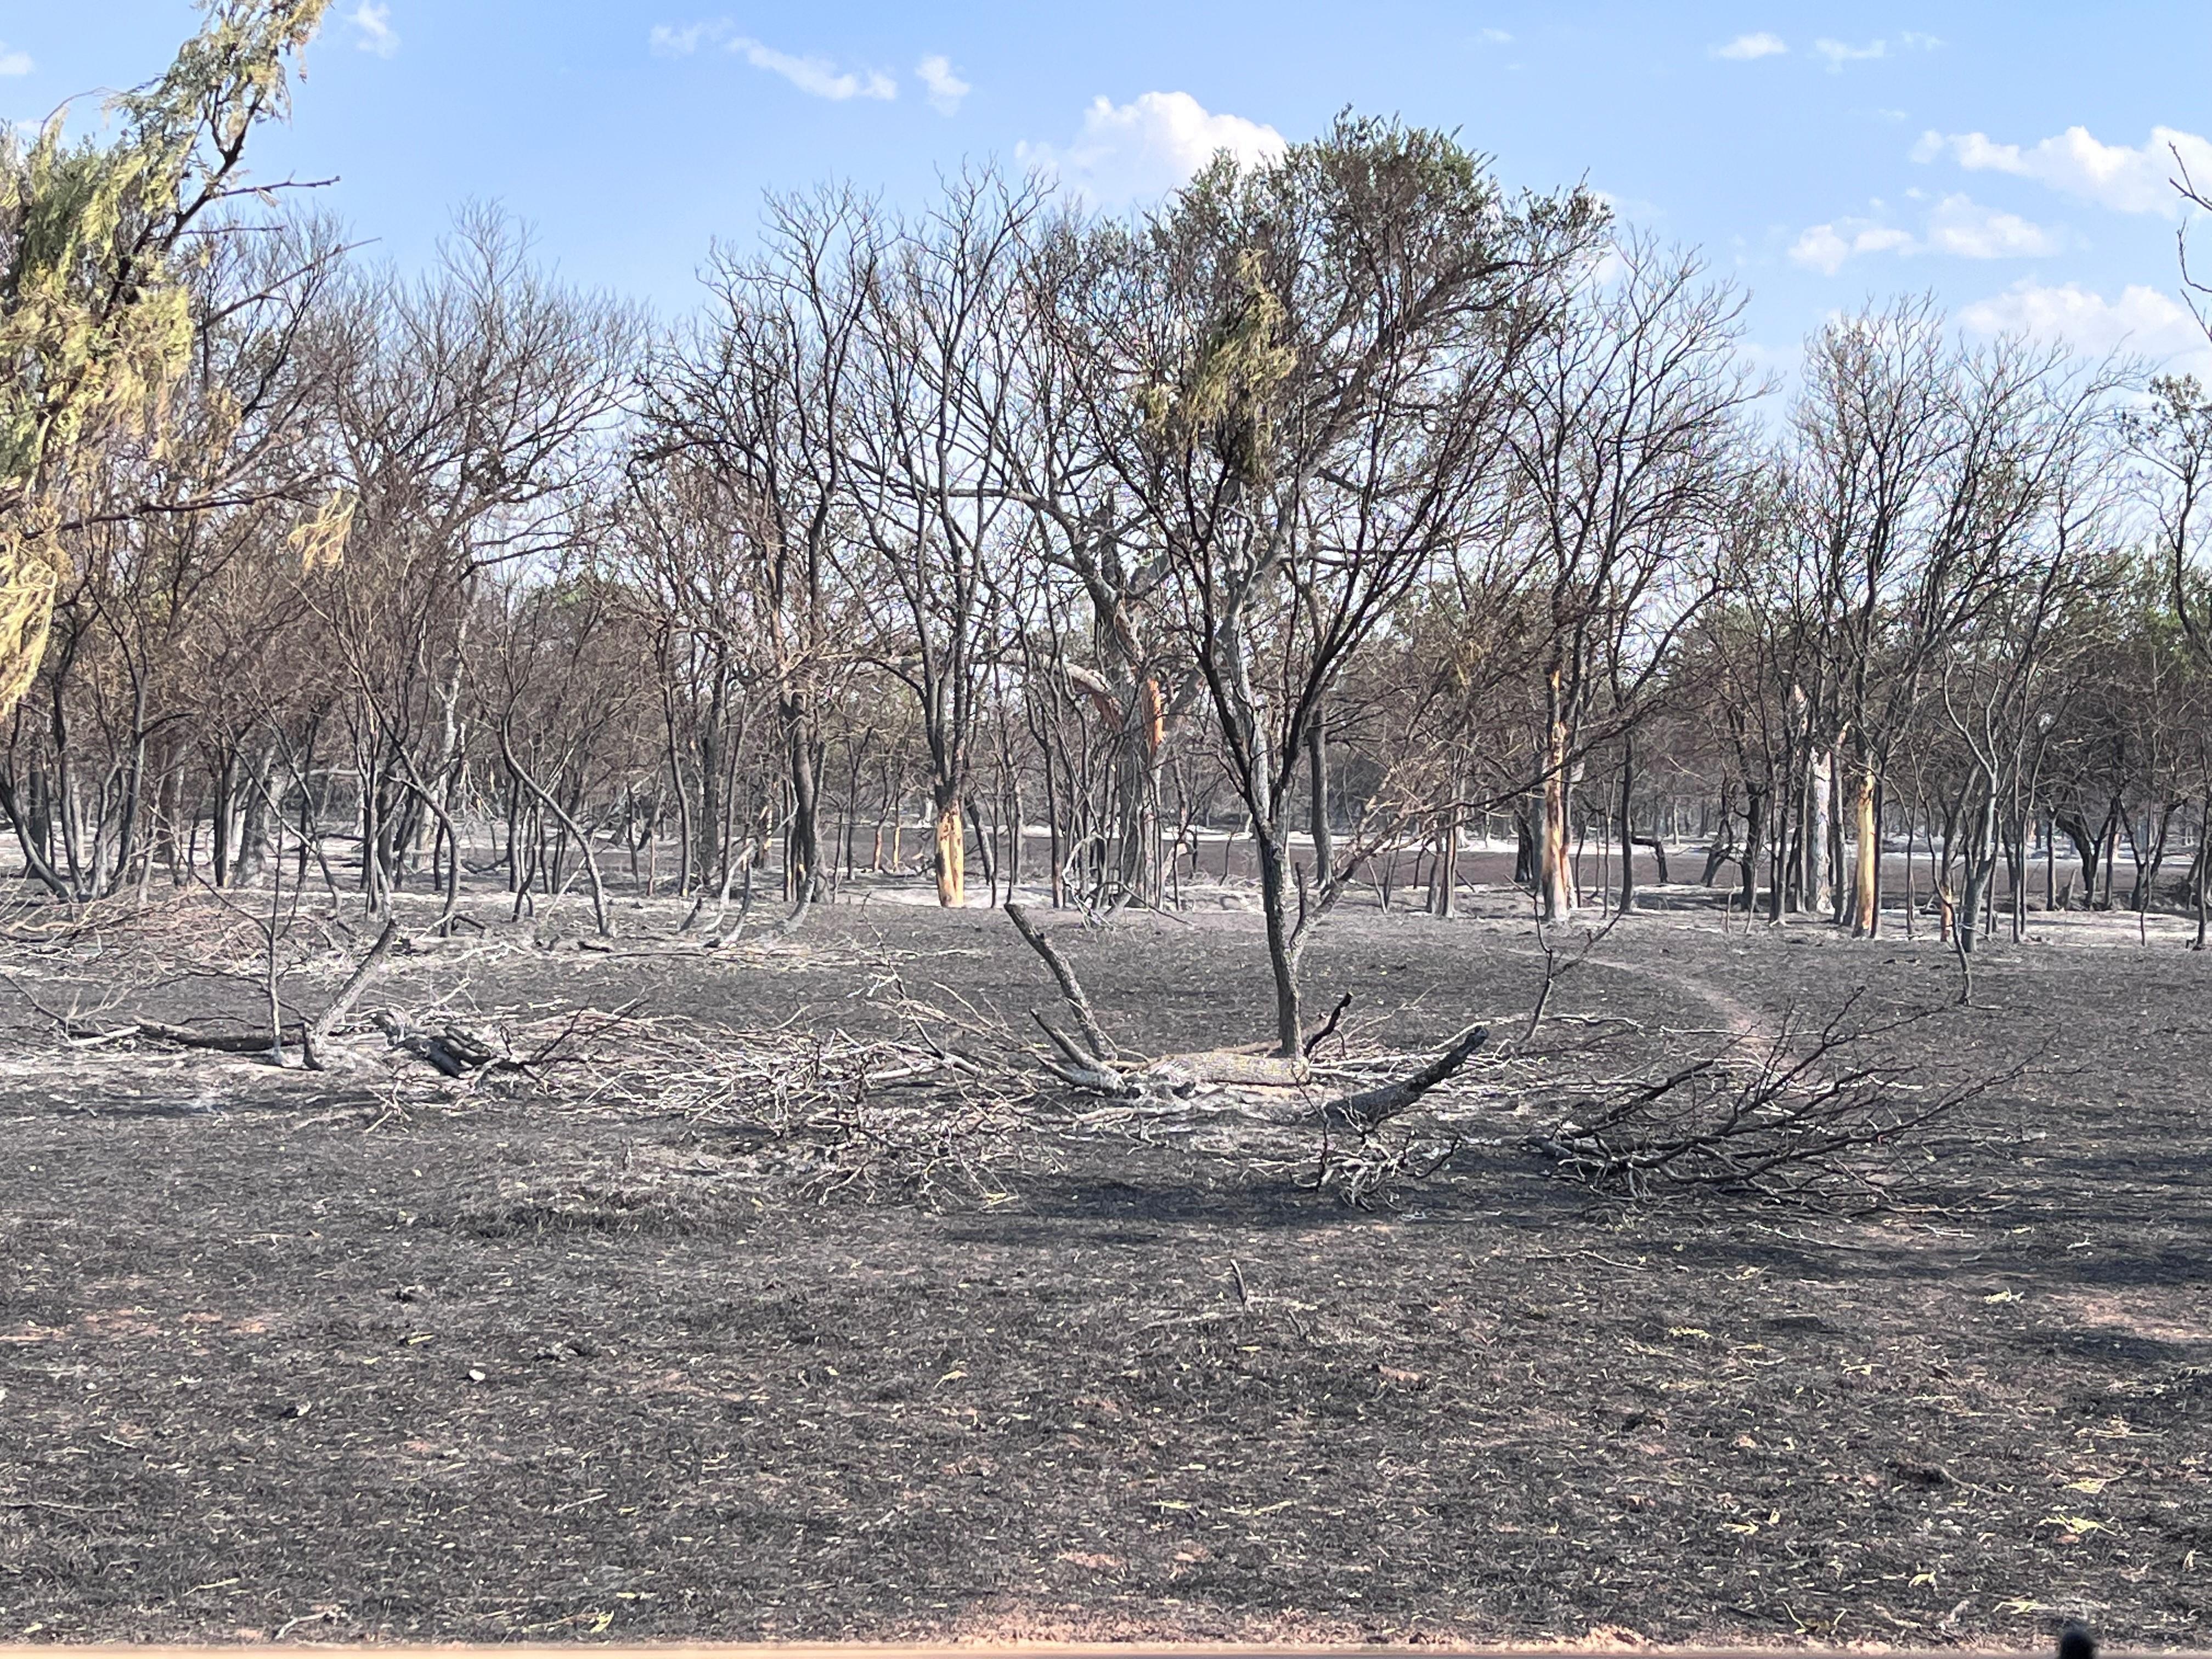 picture shows burned vegetation area, to include trees and grass. some of the grass and trees are white- ash from exposure to extreme fire behavior